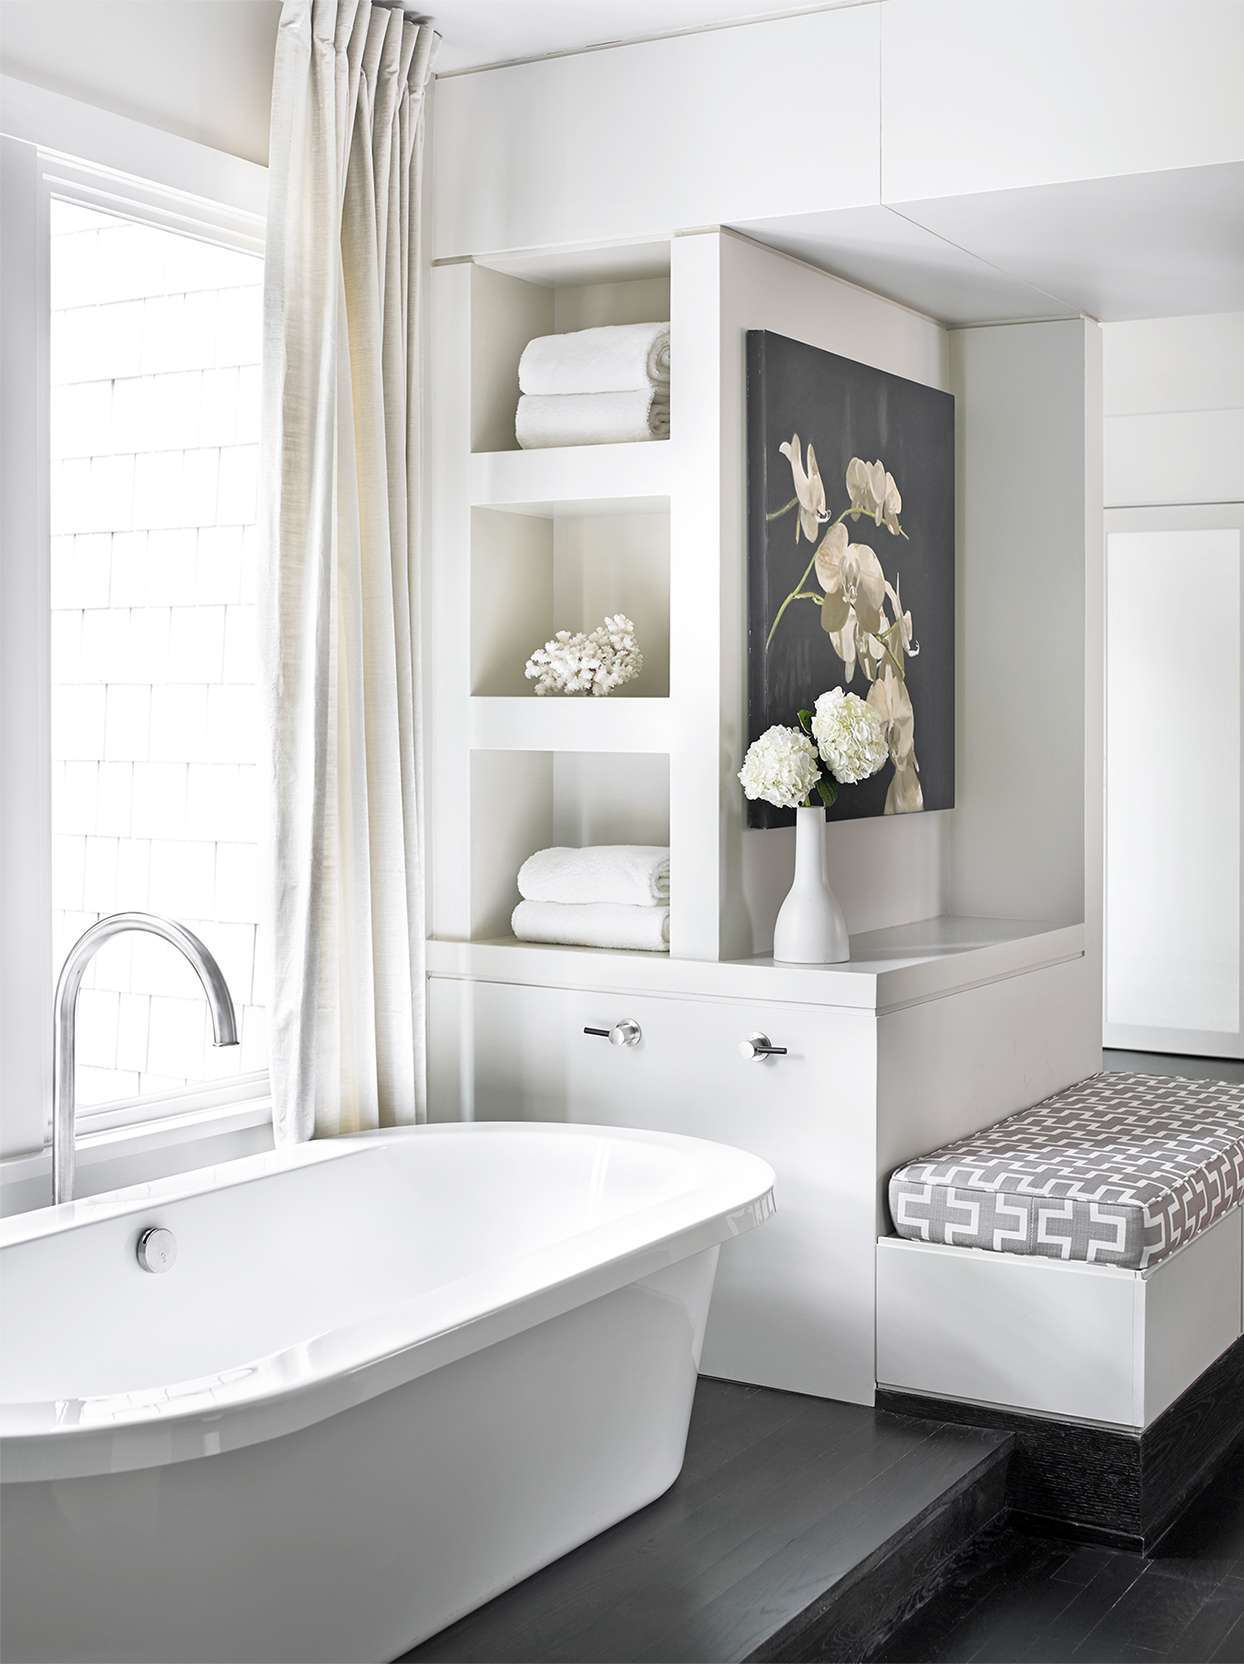 White bathroom with tub, bench, storage and floral artwork